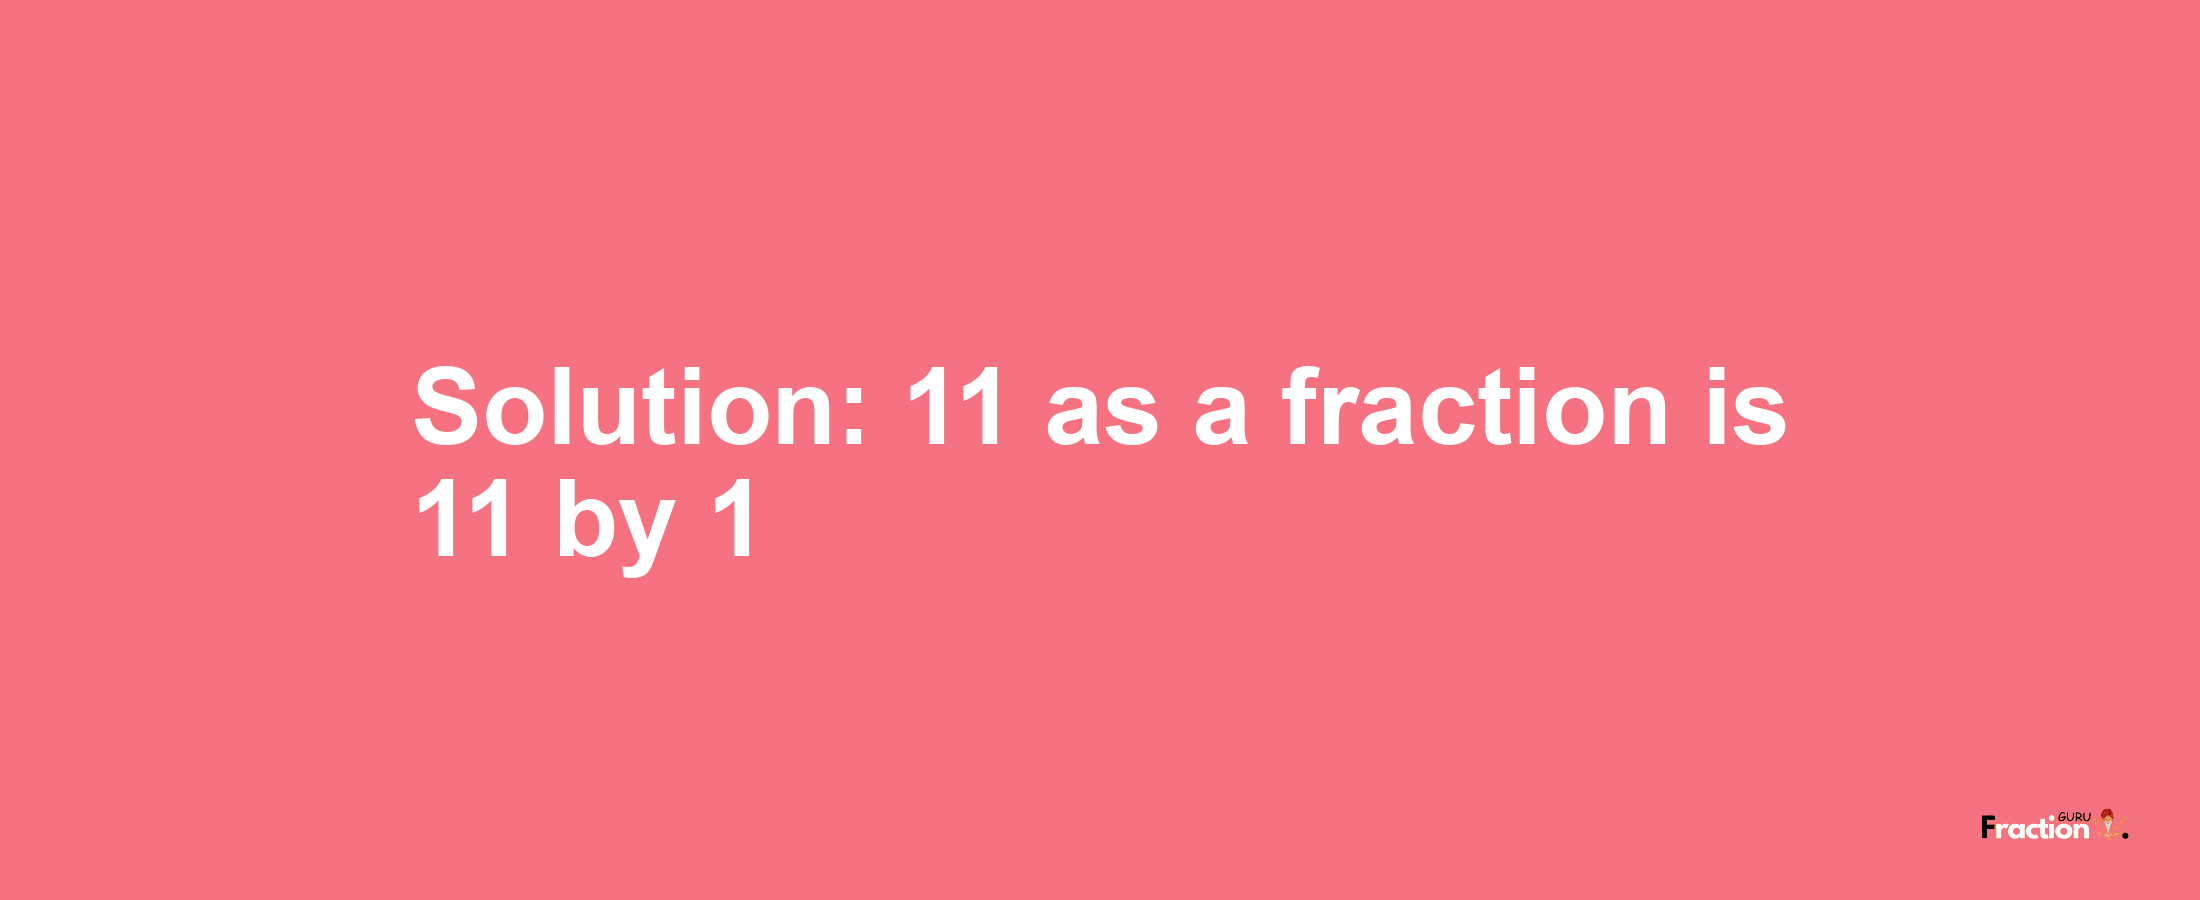 Solution:11 as a fraction is 11/1